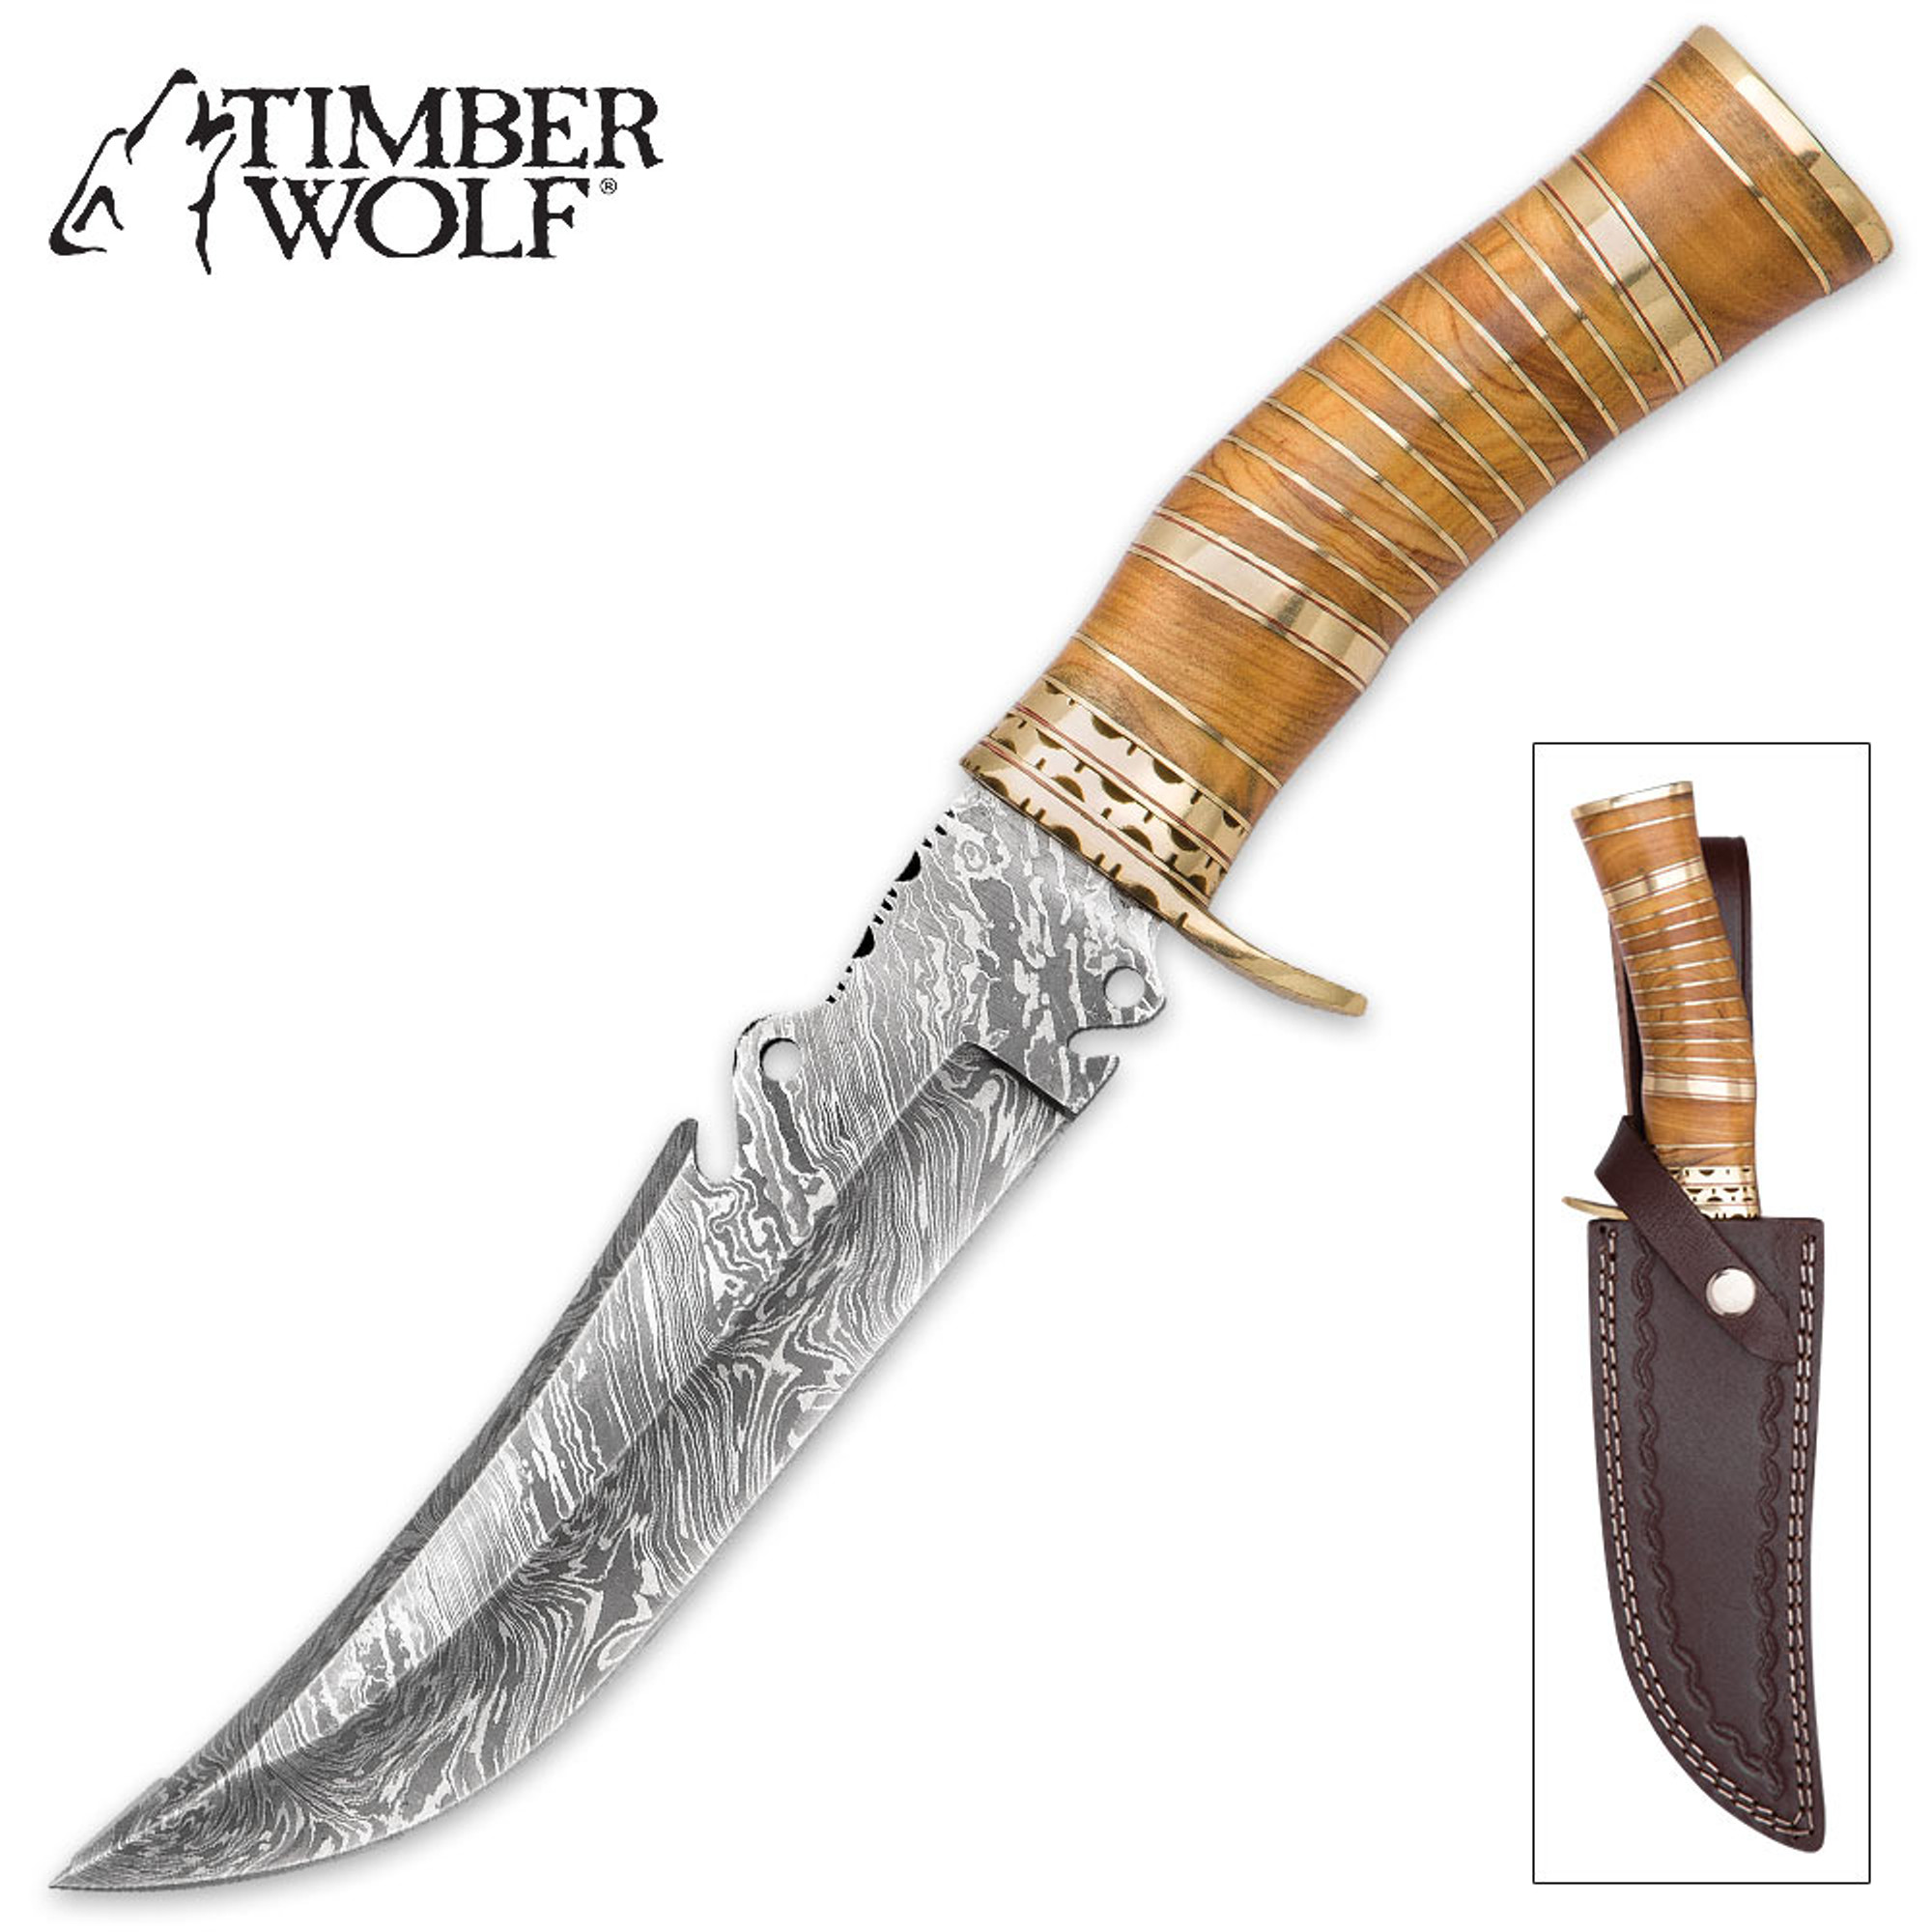 Timber Wolf Ancient Wood Damascus Steel and Olivewood Bowie Knife w/ Leather Sheath